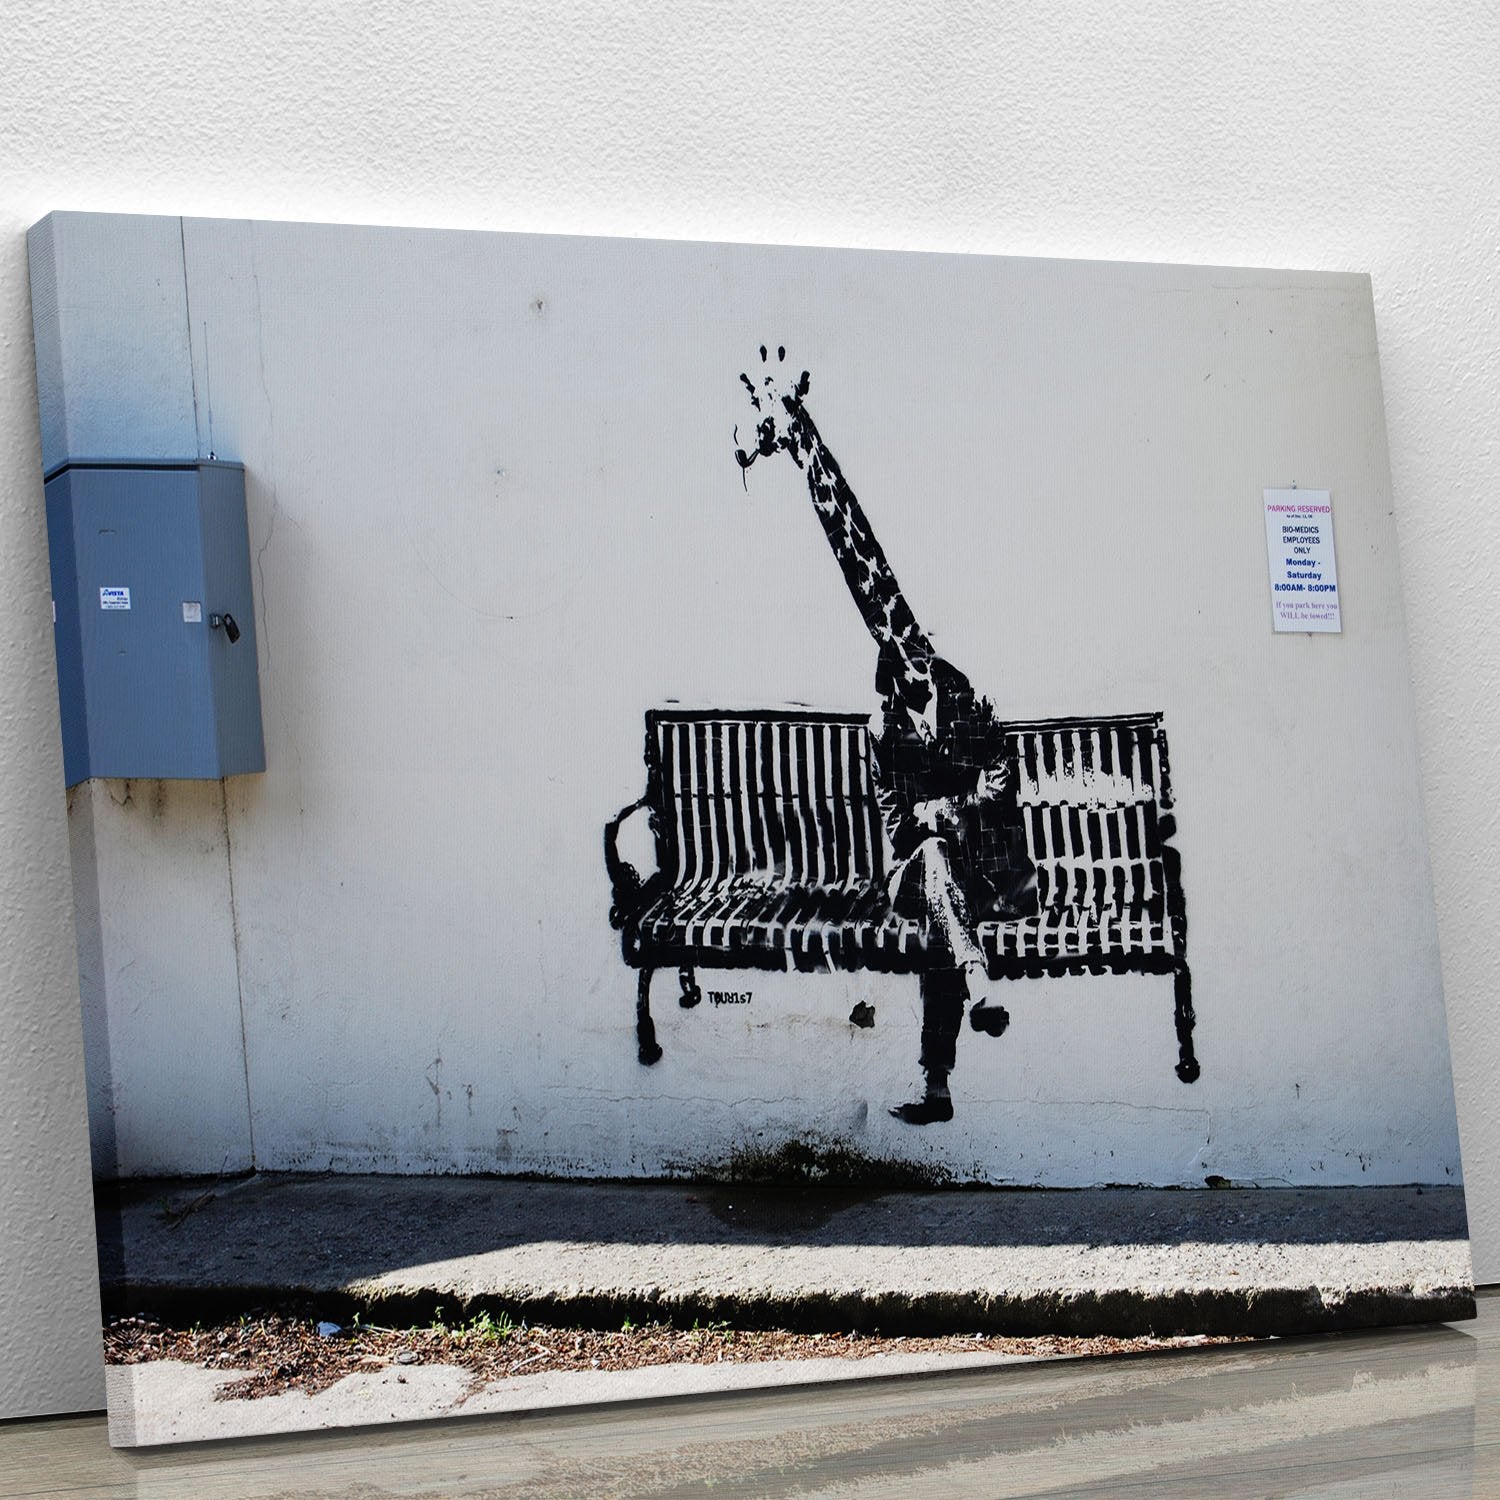 Banksy Giraffe on a Bench Canvas Print or Poster